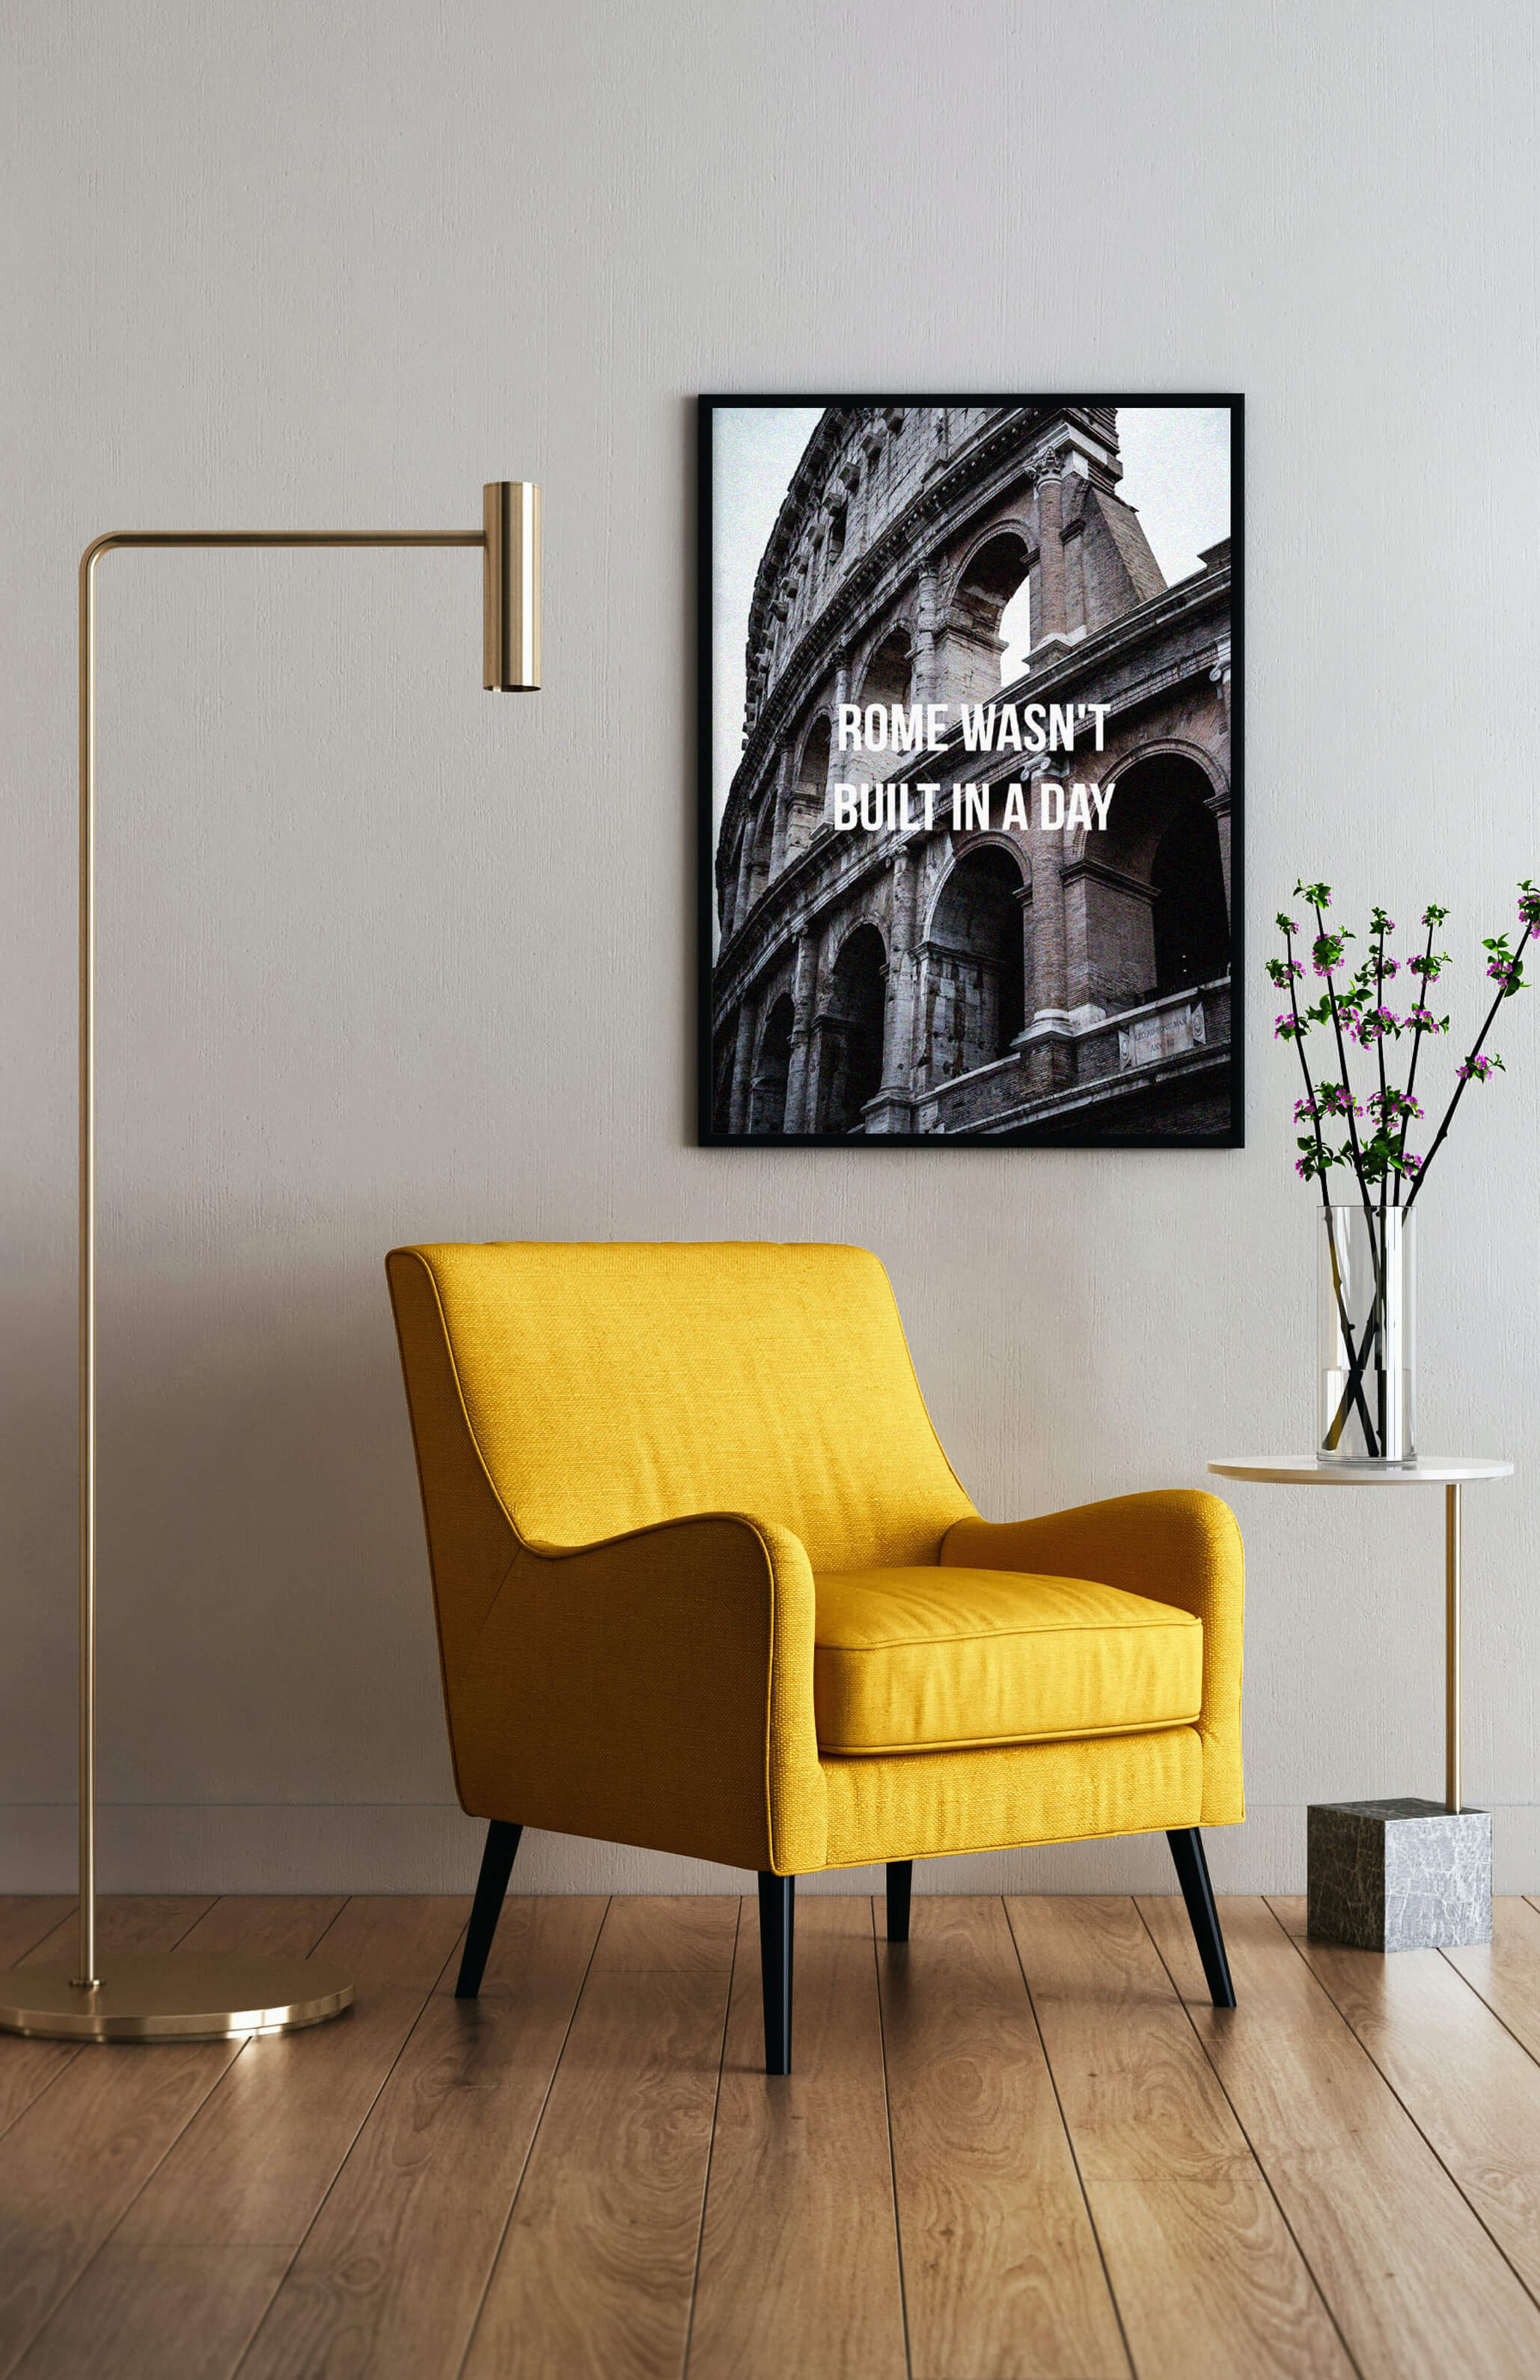 redbaysand womens Rome wasn't Built in a Day, Motivational posters, mens inspirational wall artwork and empowering poster quote designs for office, home gym, school, kitchen and living room.